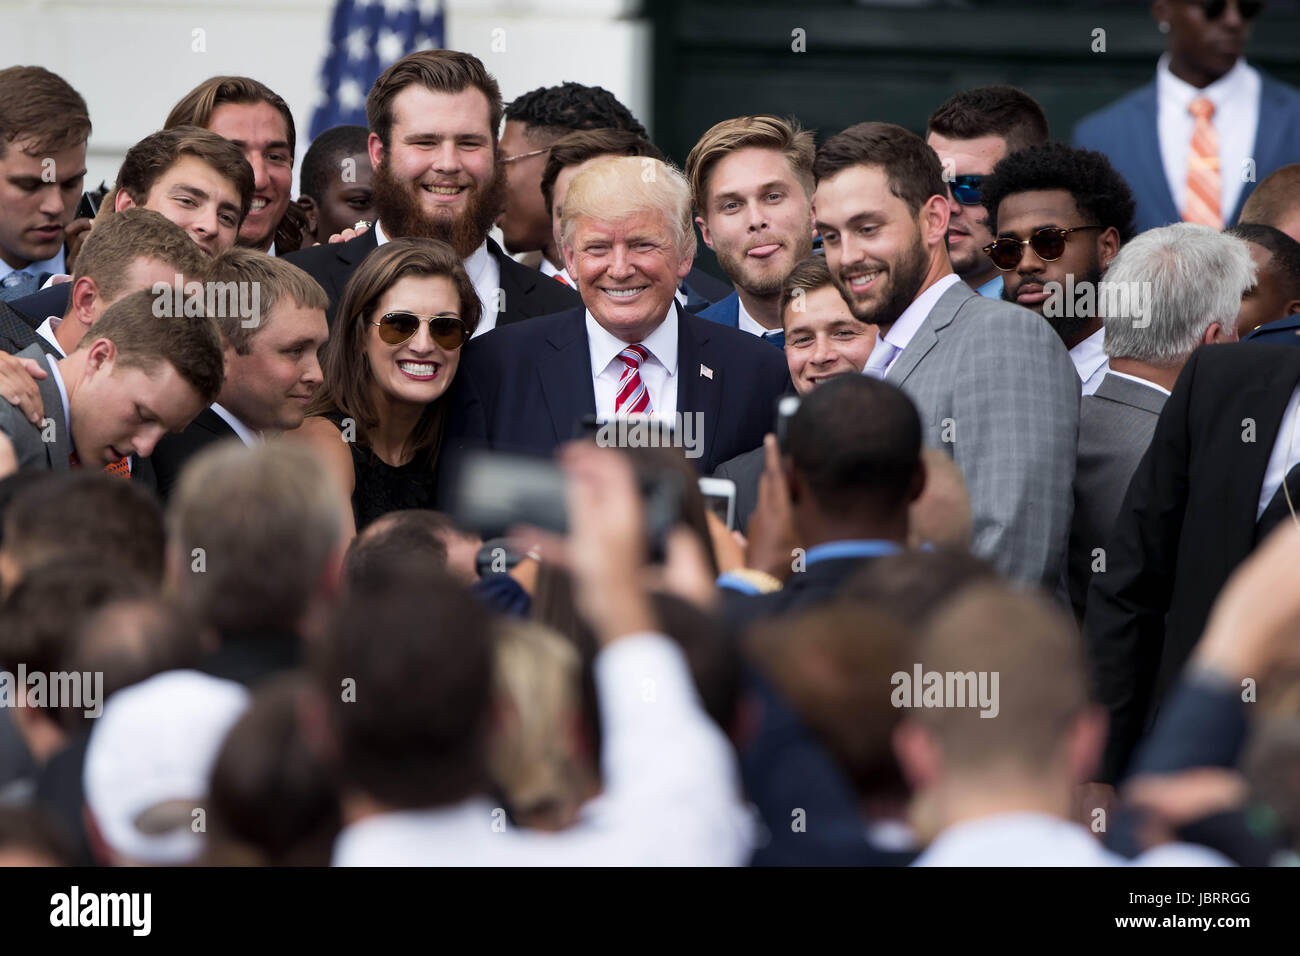 Washington, DC, USA. 12th June, 2017. U.S. President Donald Trump poses for photos during a ceremony honoring the 2016 NCAA Football National Champions Clemson University Tigers at the White House in Washington, DC, the United States, on June 12, 2017. Credit: Ting Shen/Xinhua/Alamy Live News Stock Photo